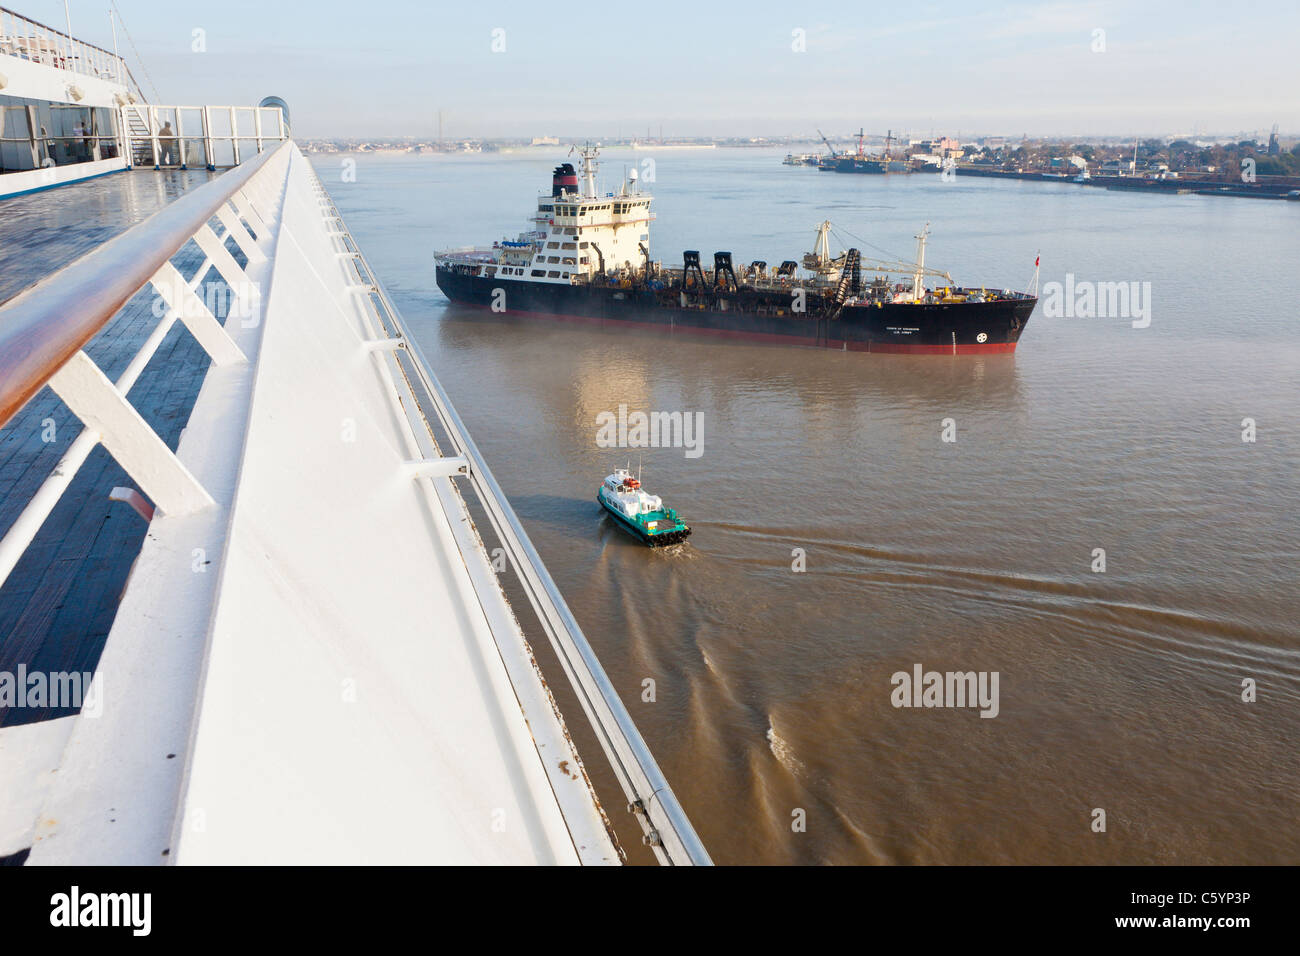 United States Army Corps of Engineers Schiff auf dem Mississippi in New Orleans Stockfoto